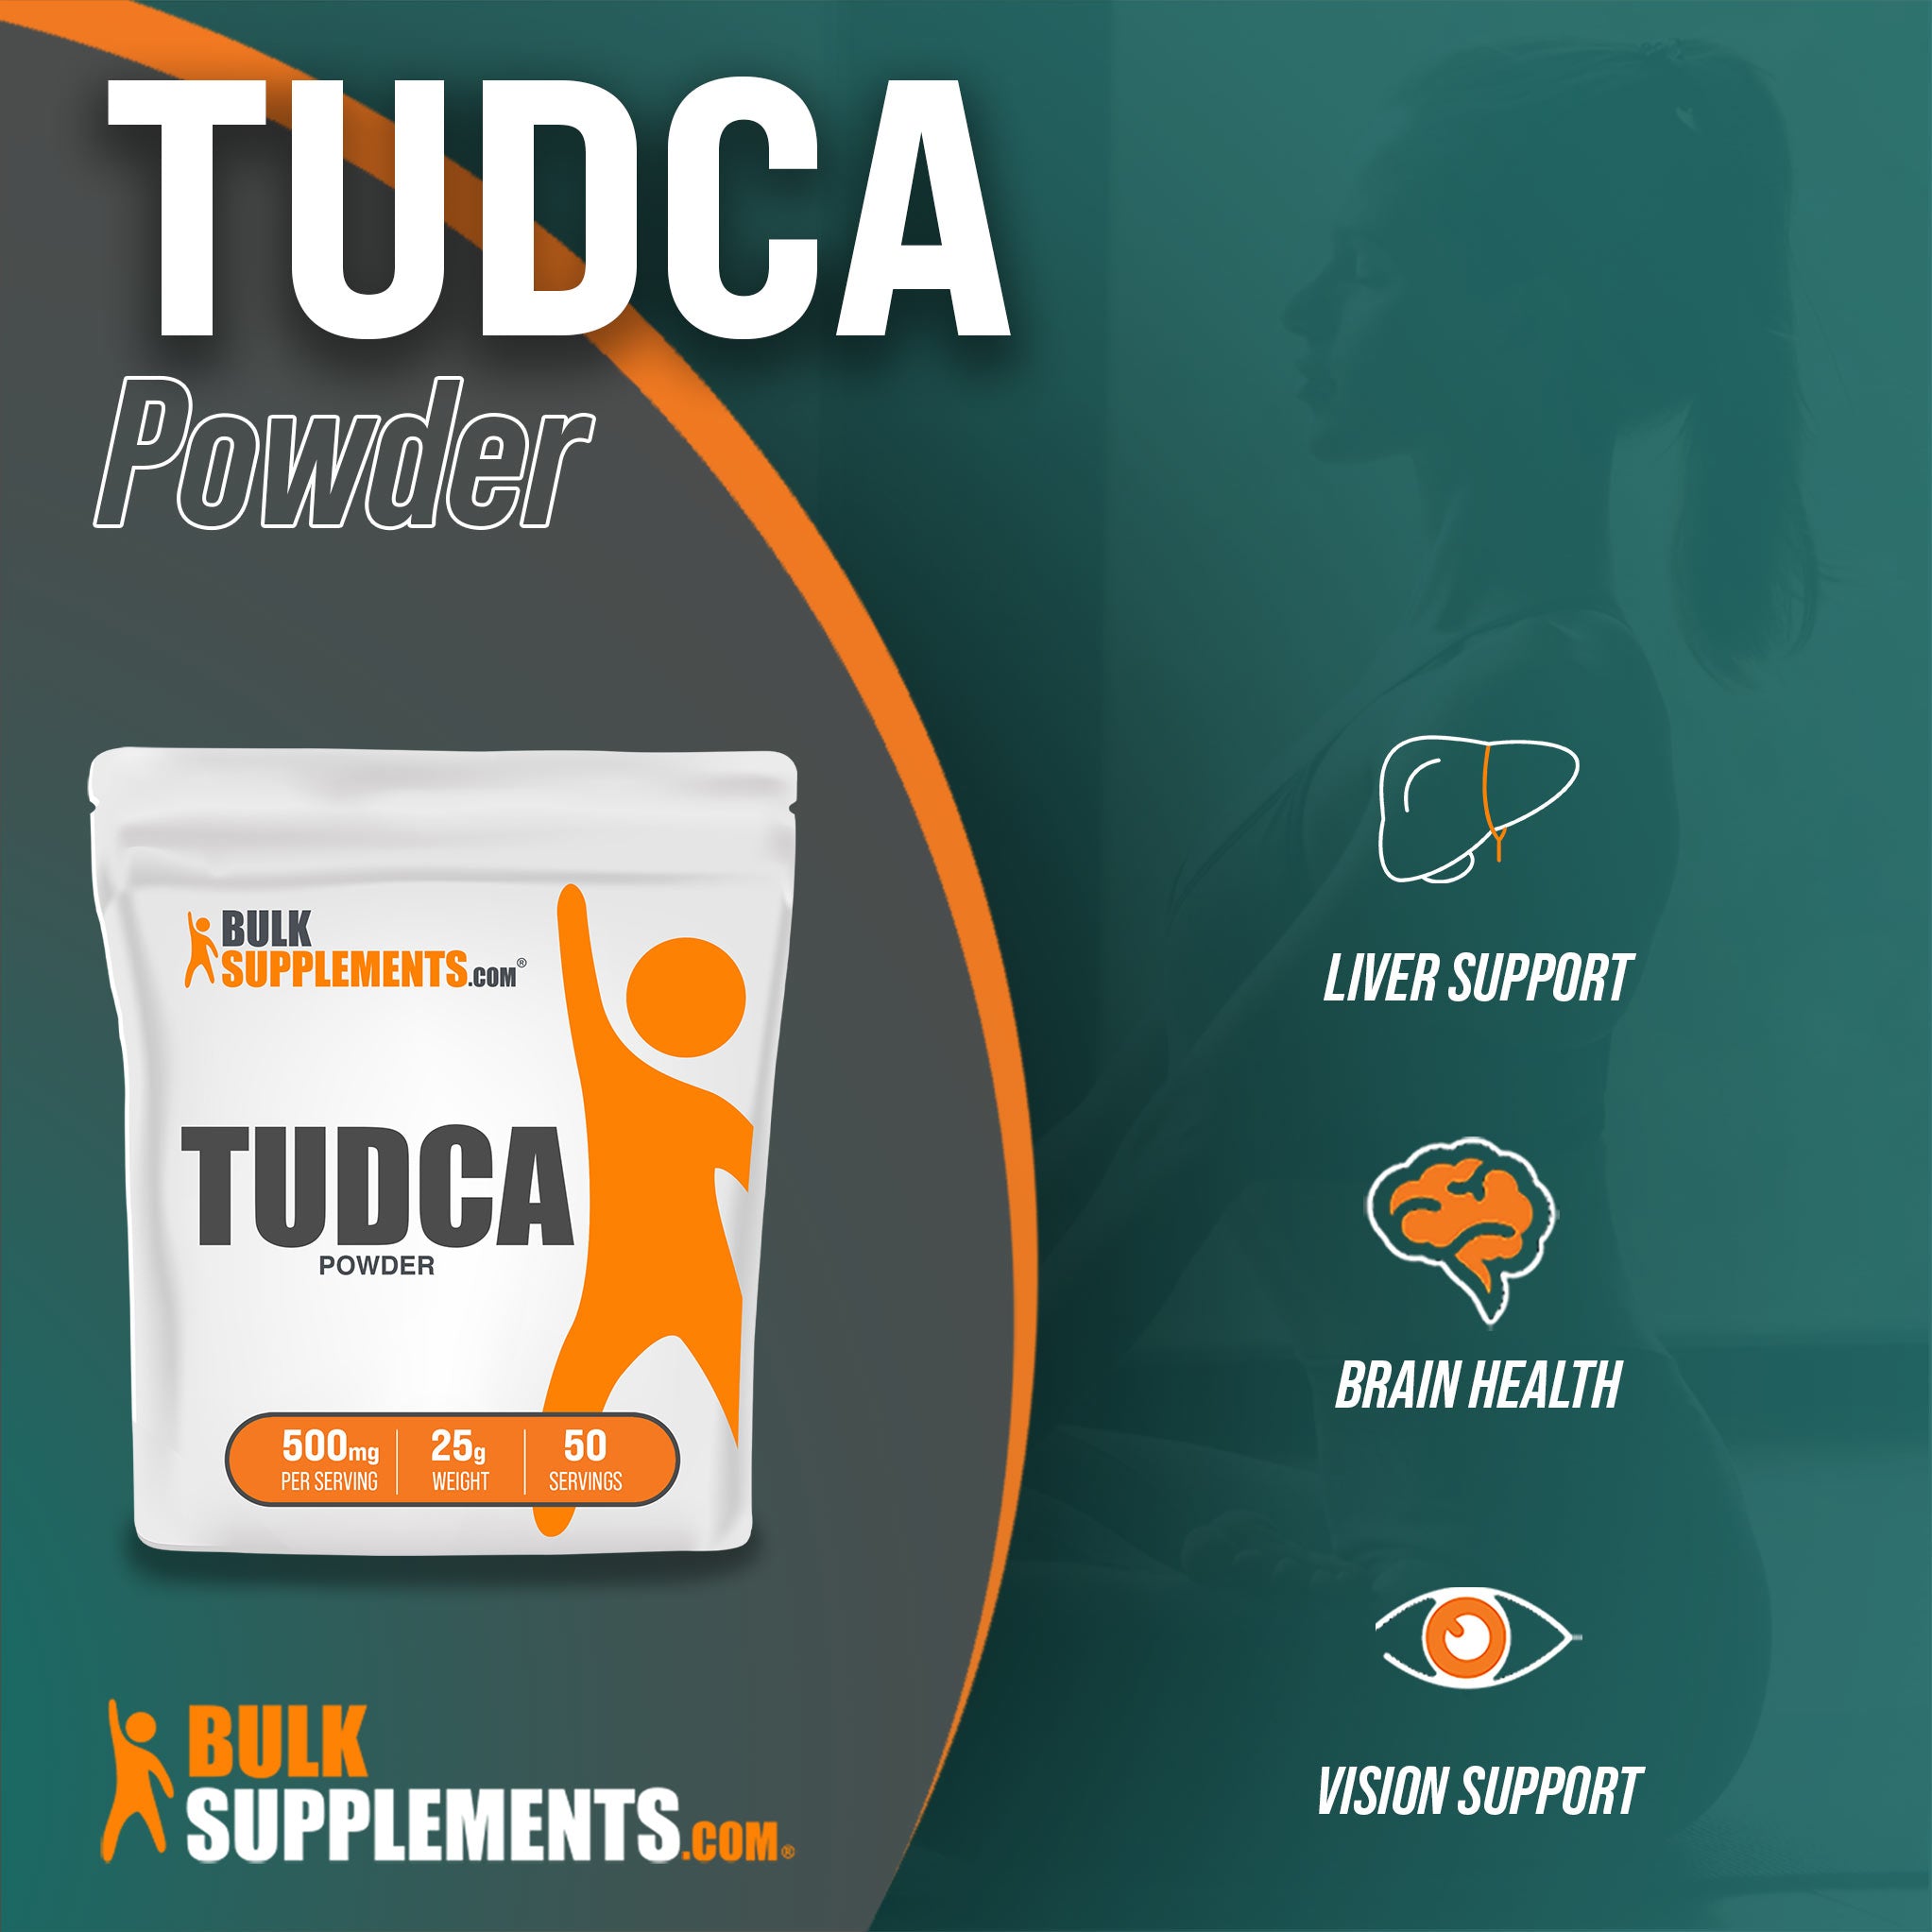 Benefits of TUDCA: liver support, brain health, vision support